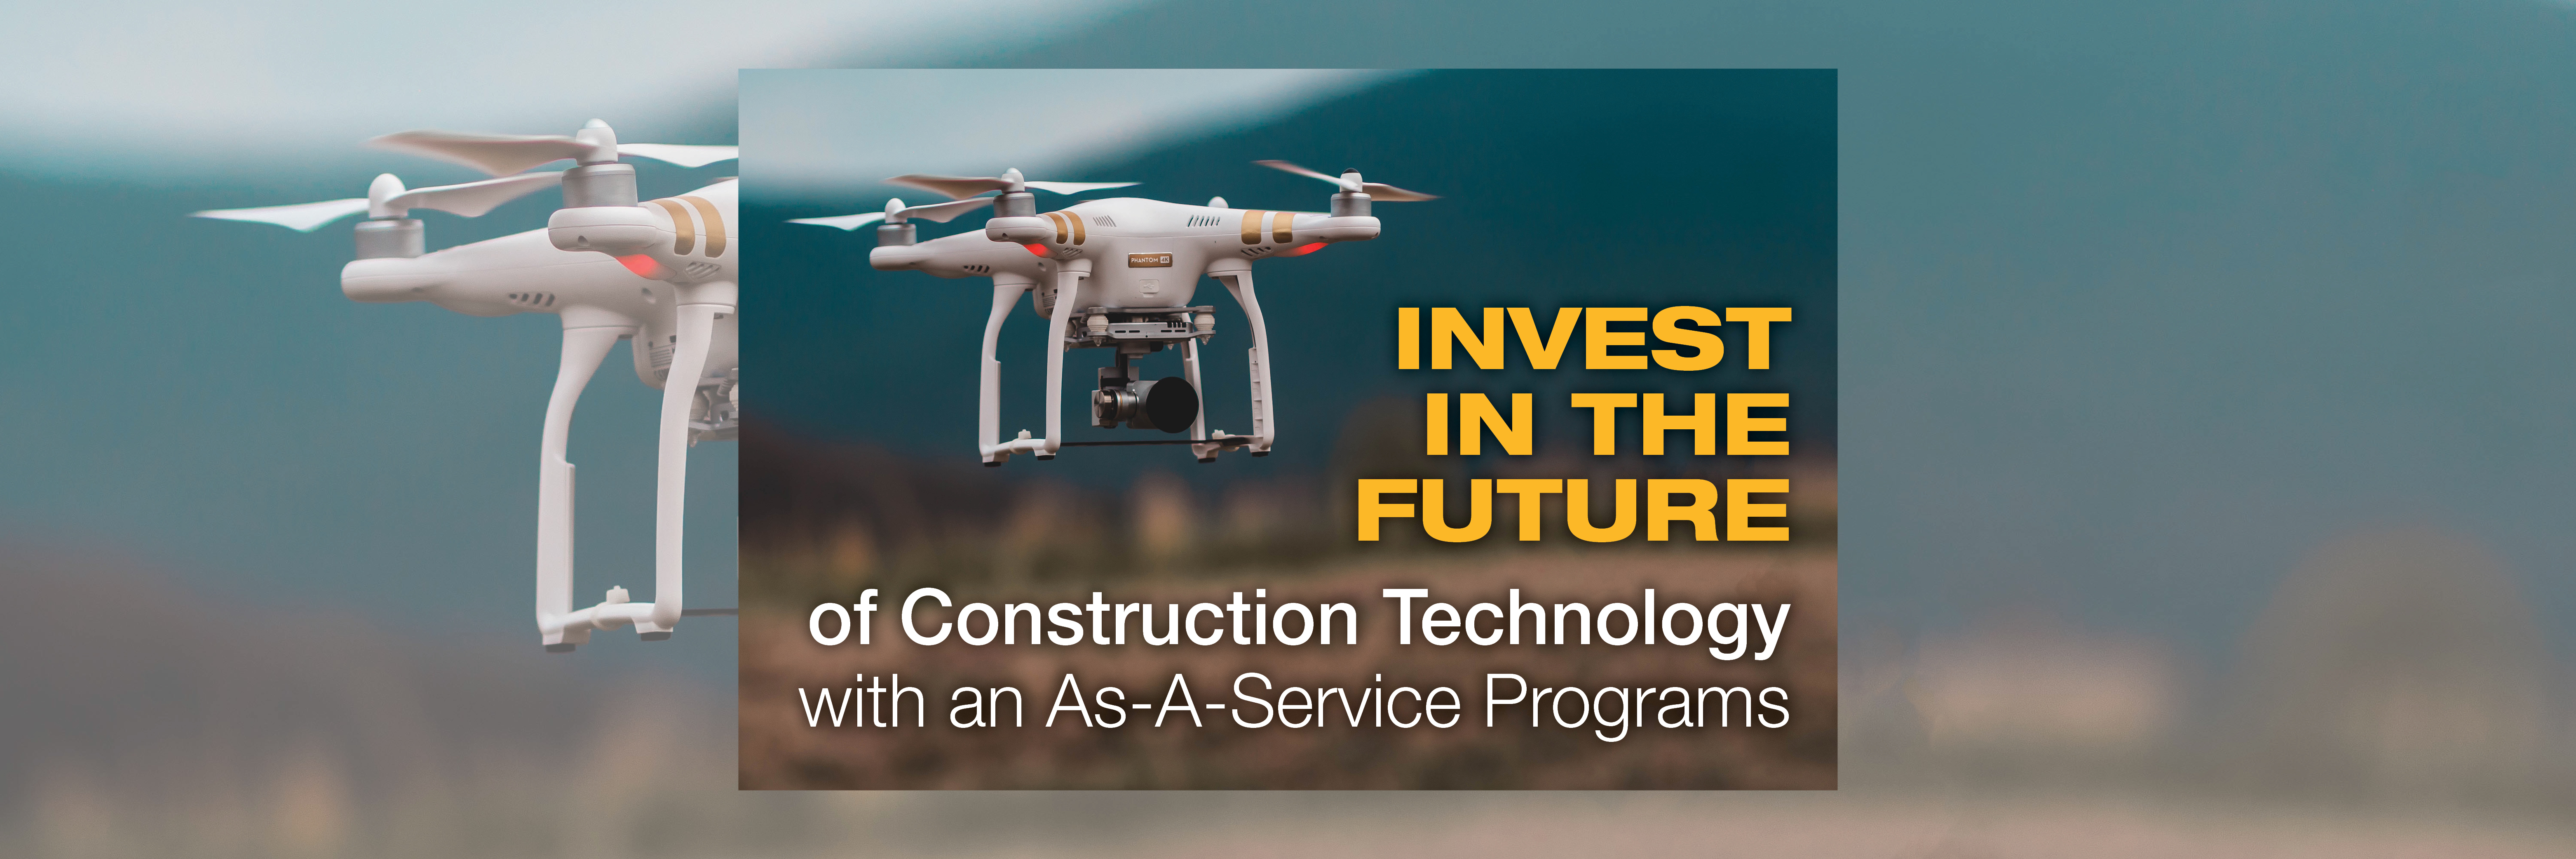 Invest in the Future of Construction Technology with an As-A-Service Program